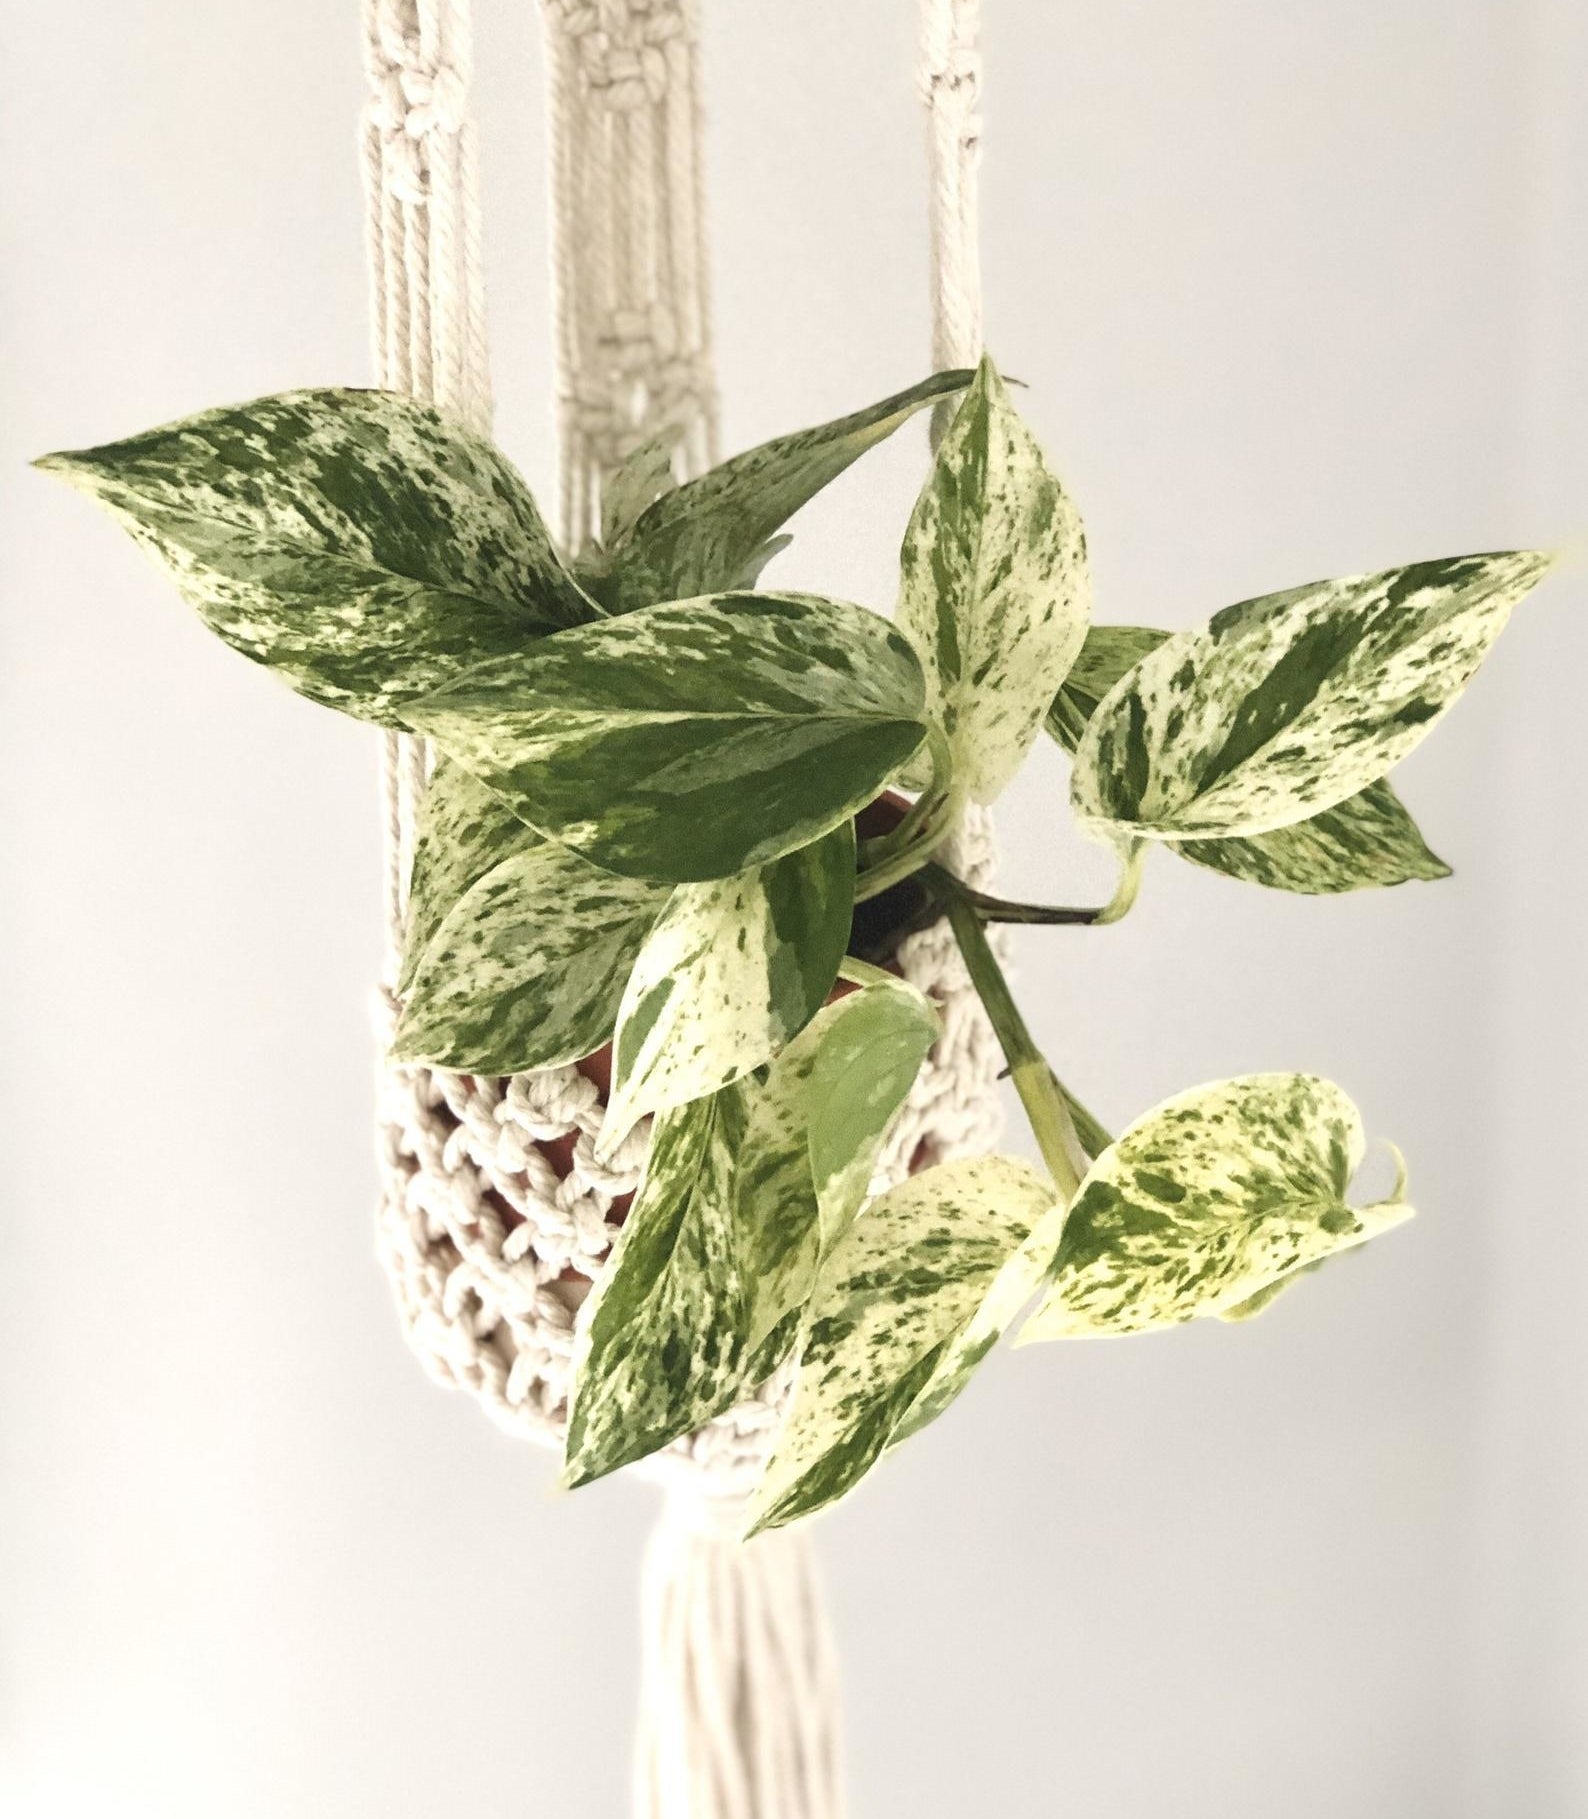 The Pothos plant hanging in a macrame hanger